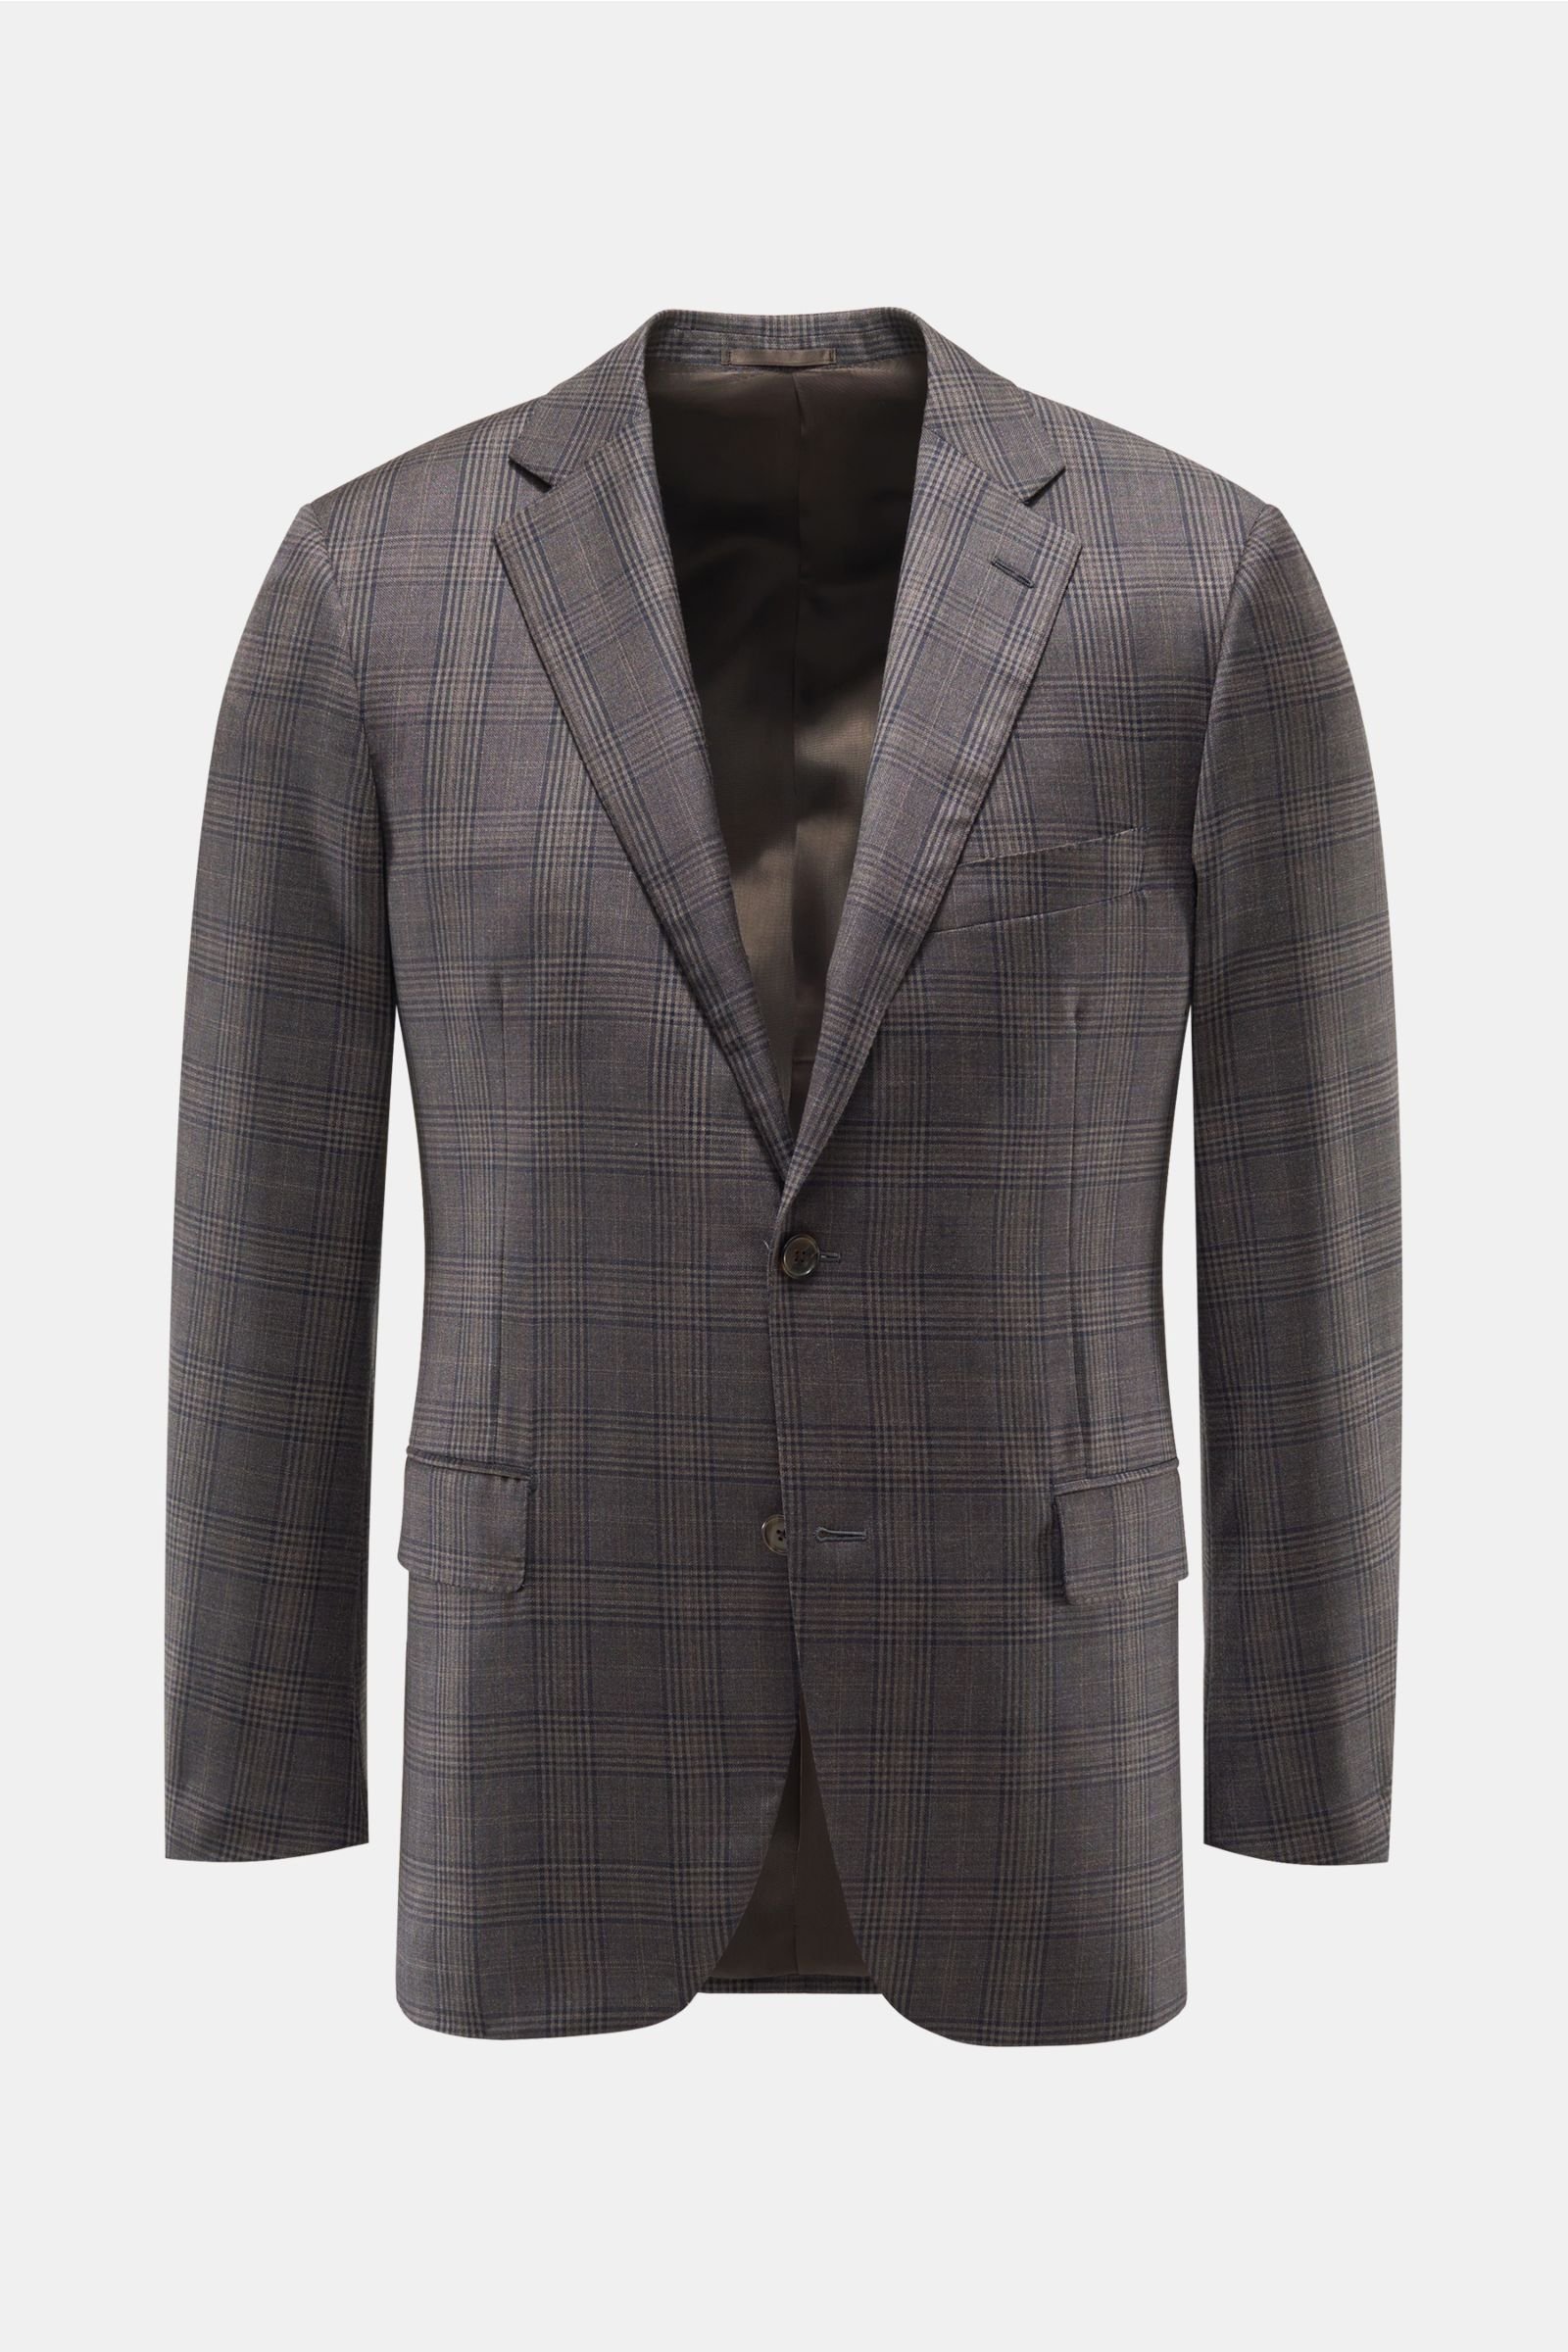 Smart-casual jacket grey-brown checked